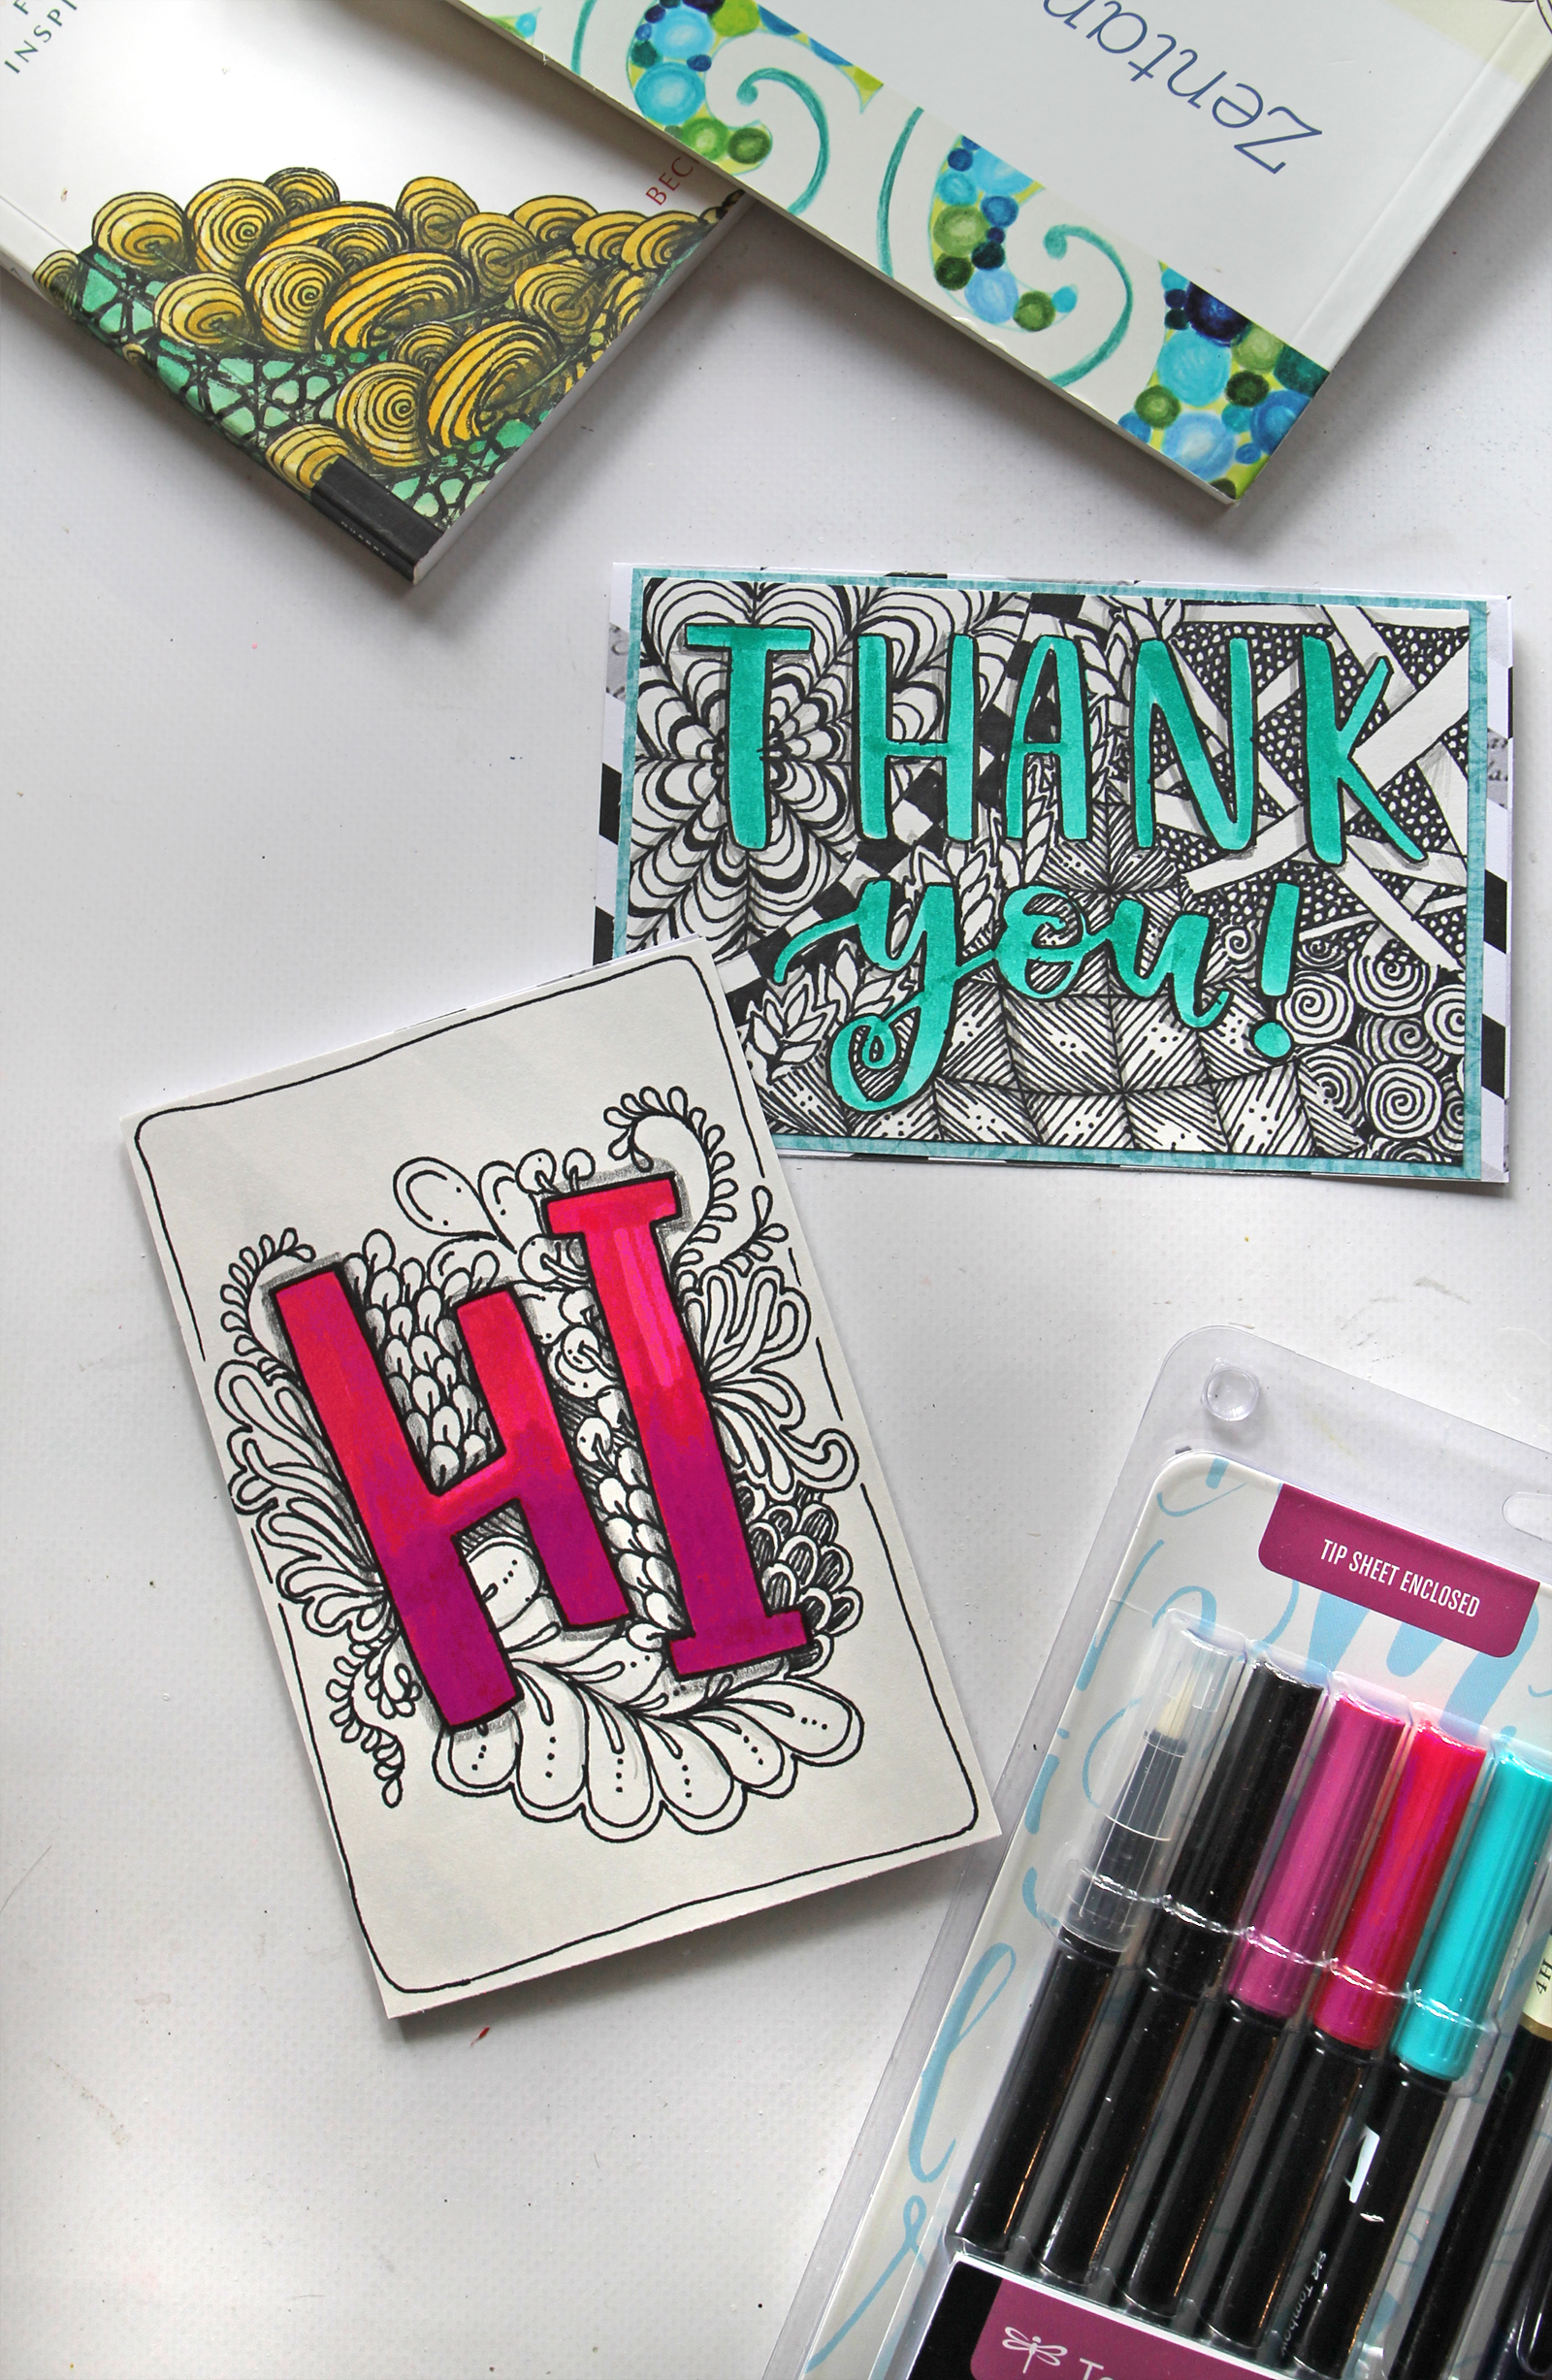 Learn how to create some easy Zentangle-Inspired Hand Lettered Cards using Tombow's Advanced Lettering Set! Tutorial by @studiokatie for @tombowusa